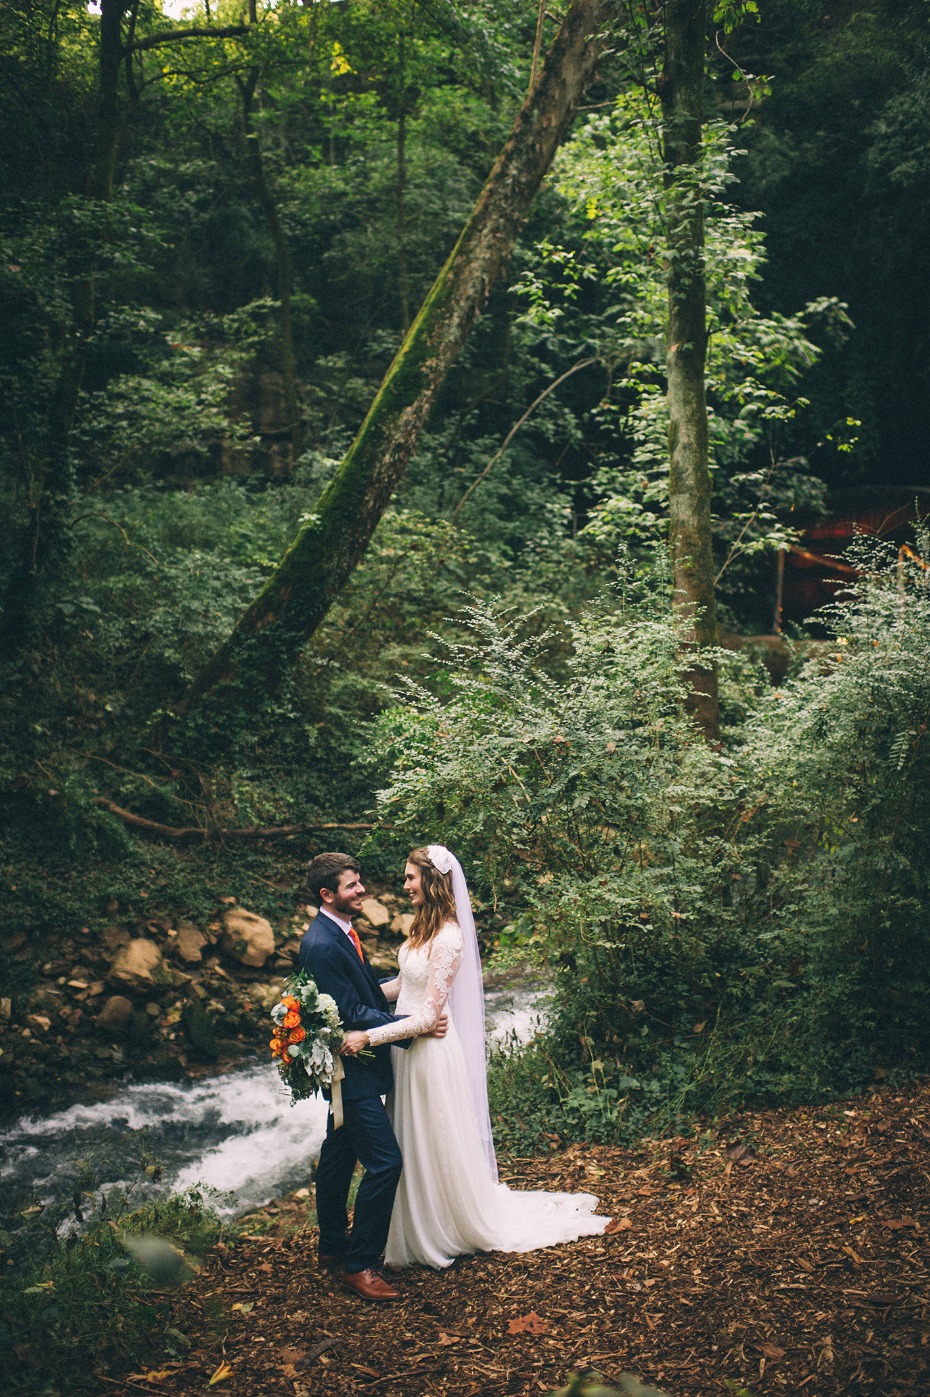 Woodsy wedding at Lost River Cave